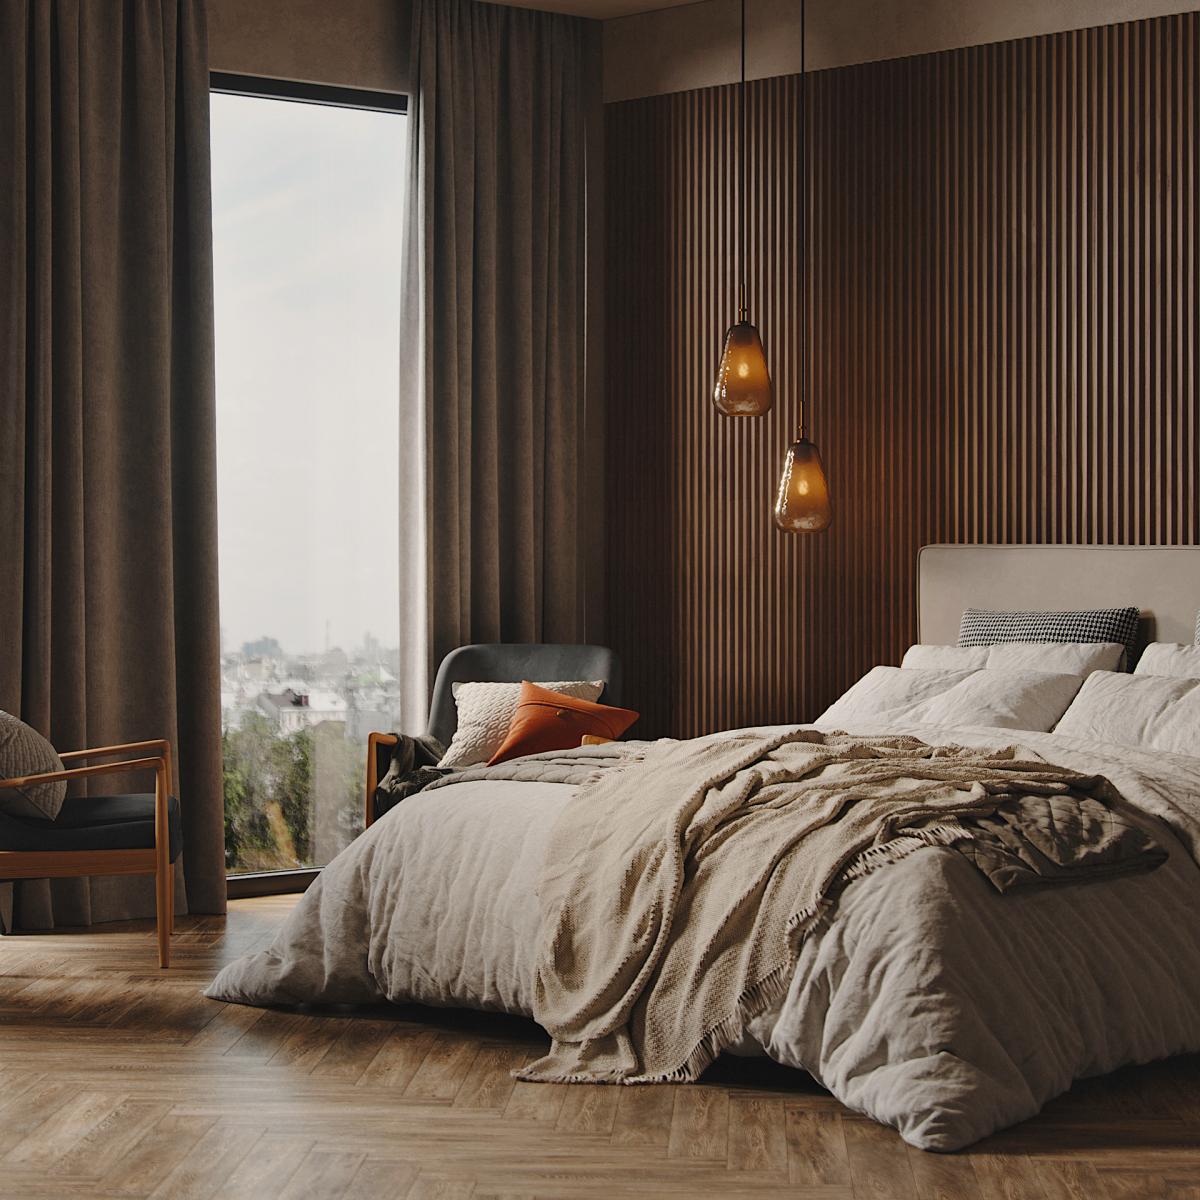 Cozy aesthetic design of the bedroom when you want long nights